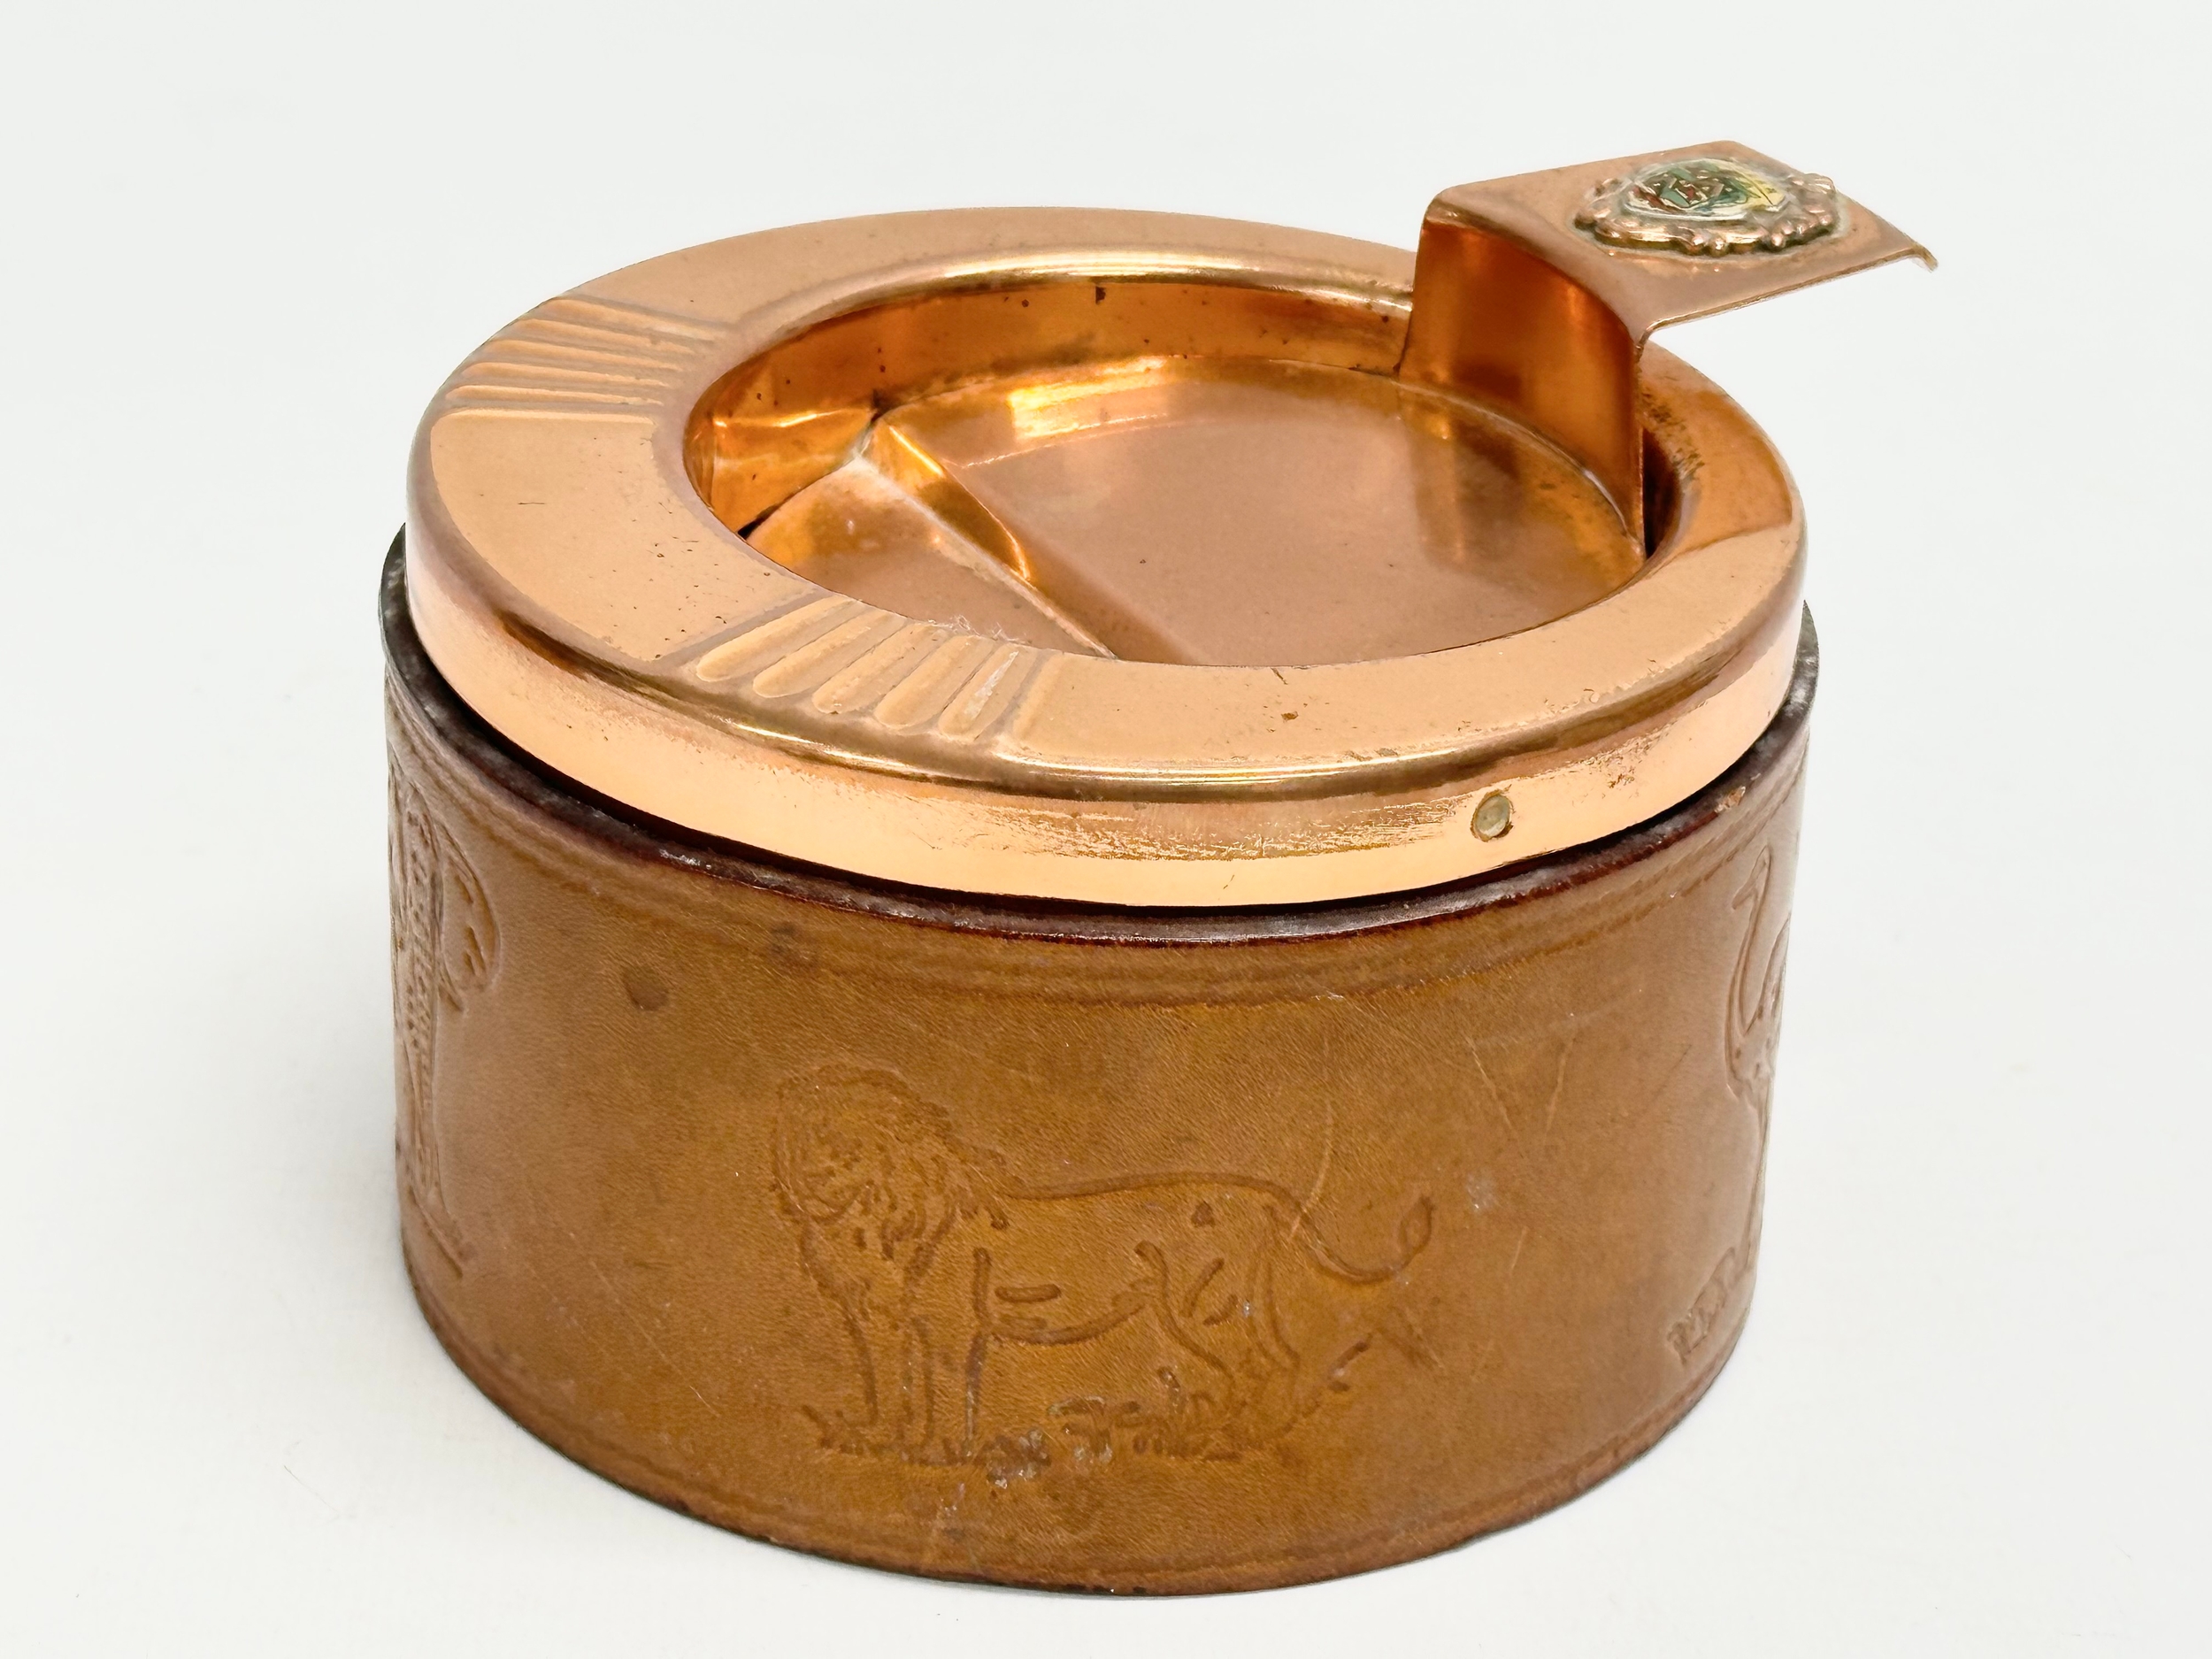 A pair of South African Durban Lines ships copper and leather bound ashtrays. 11.5x13x8cm - Image 7 of 8